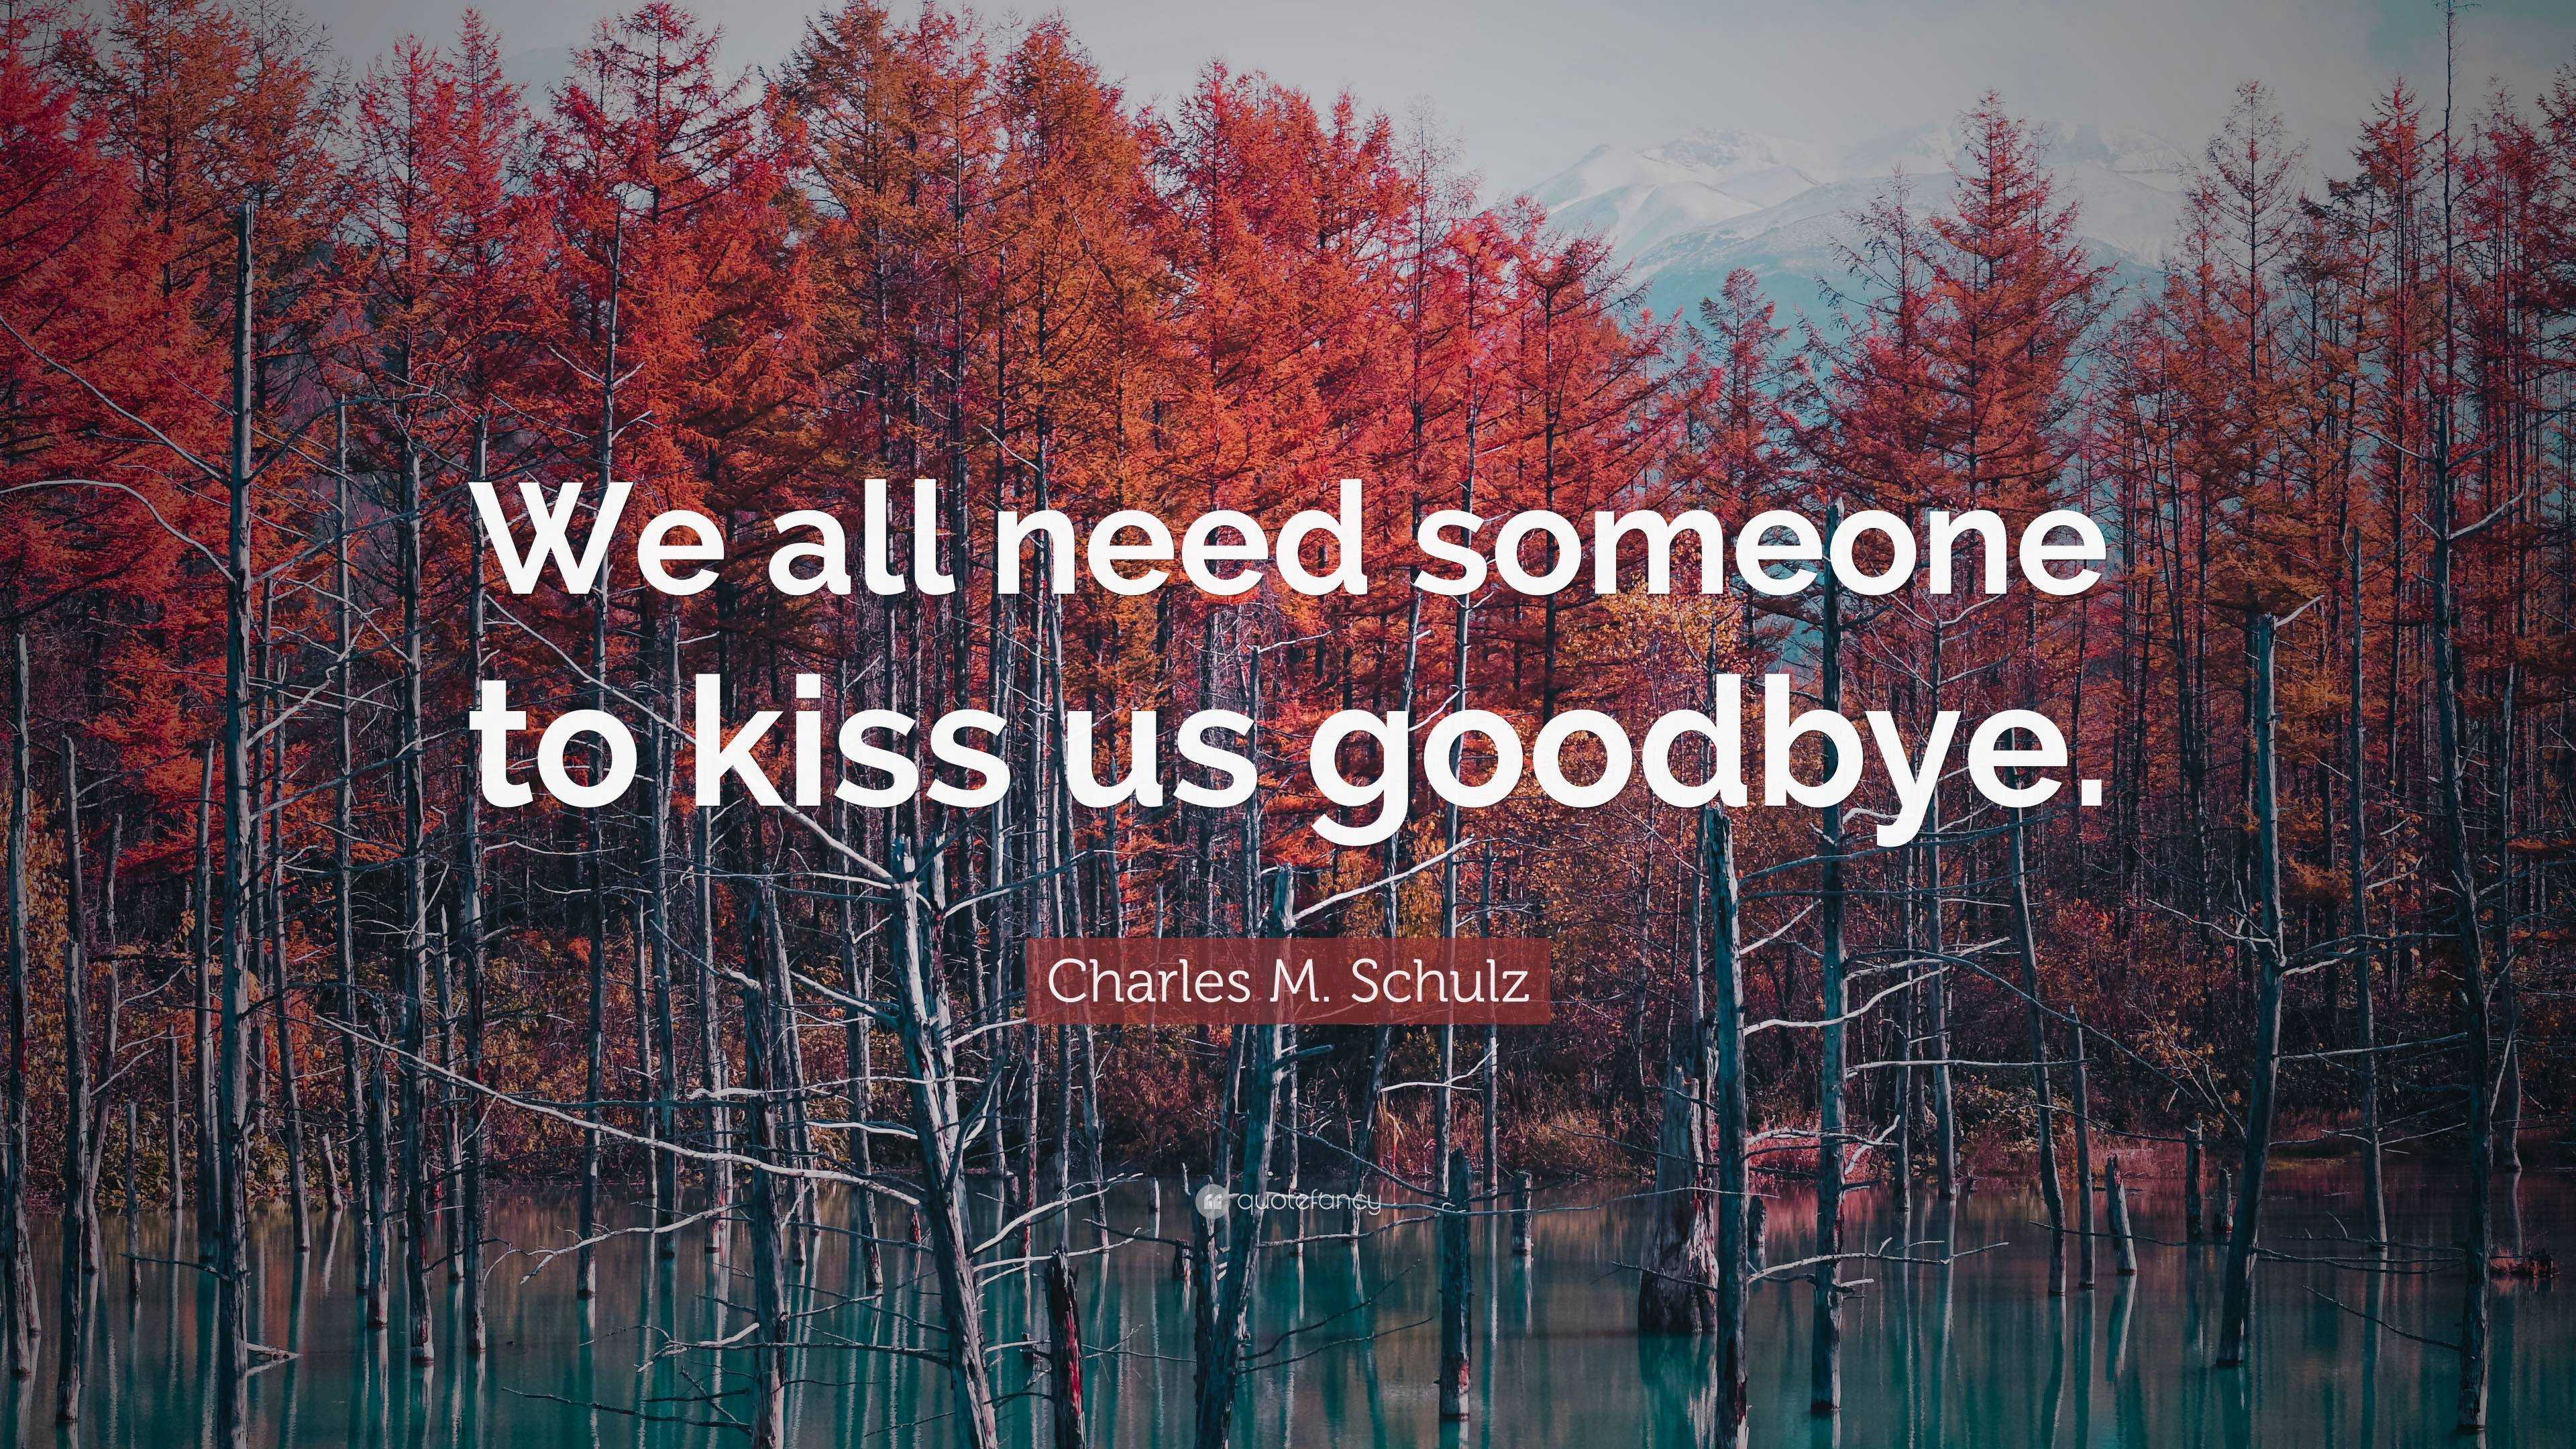 Charles M Schulz Quote We All Need Someone To Kiss Us Goodbye